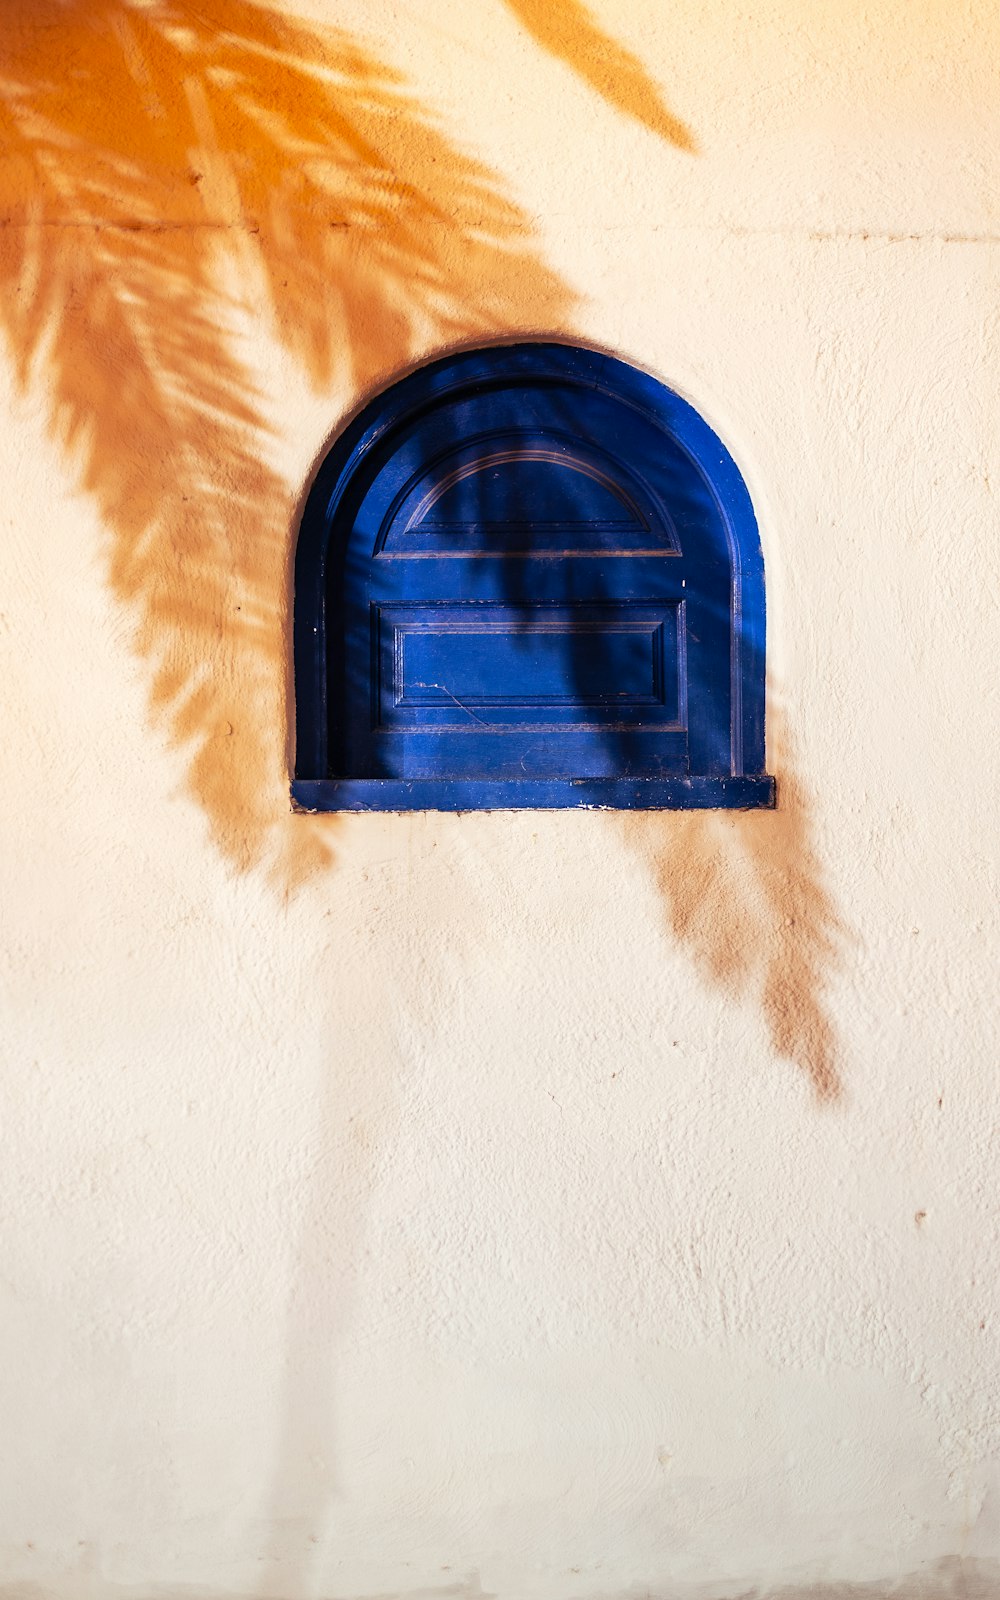 a blue window on a yellow wall with a shadow of a palm tree